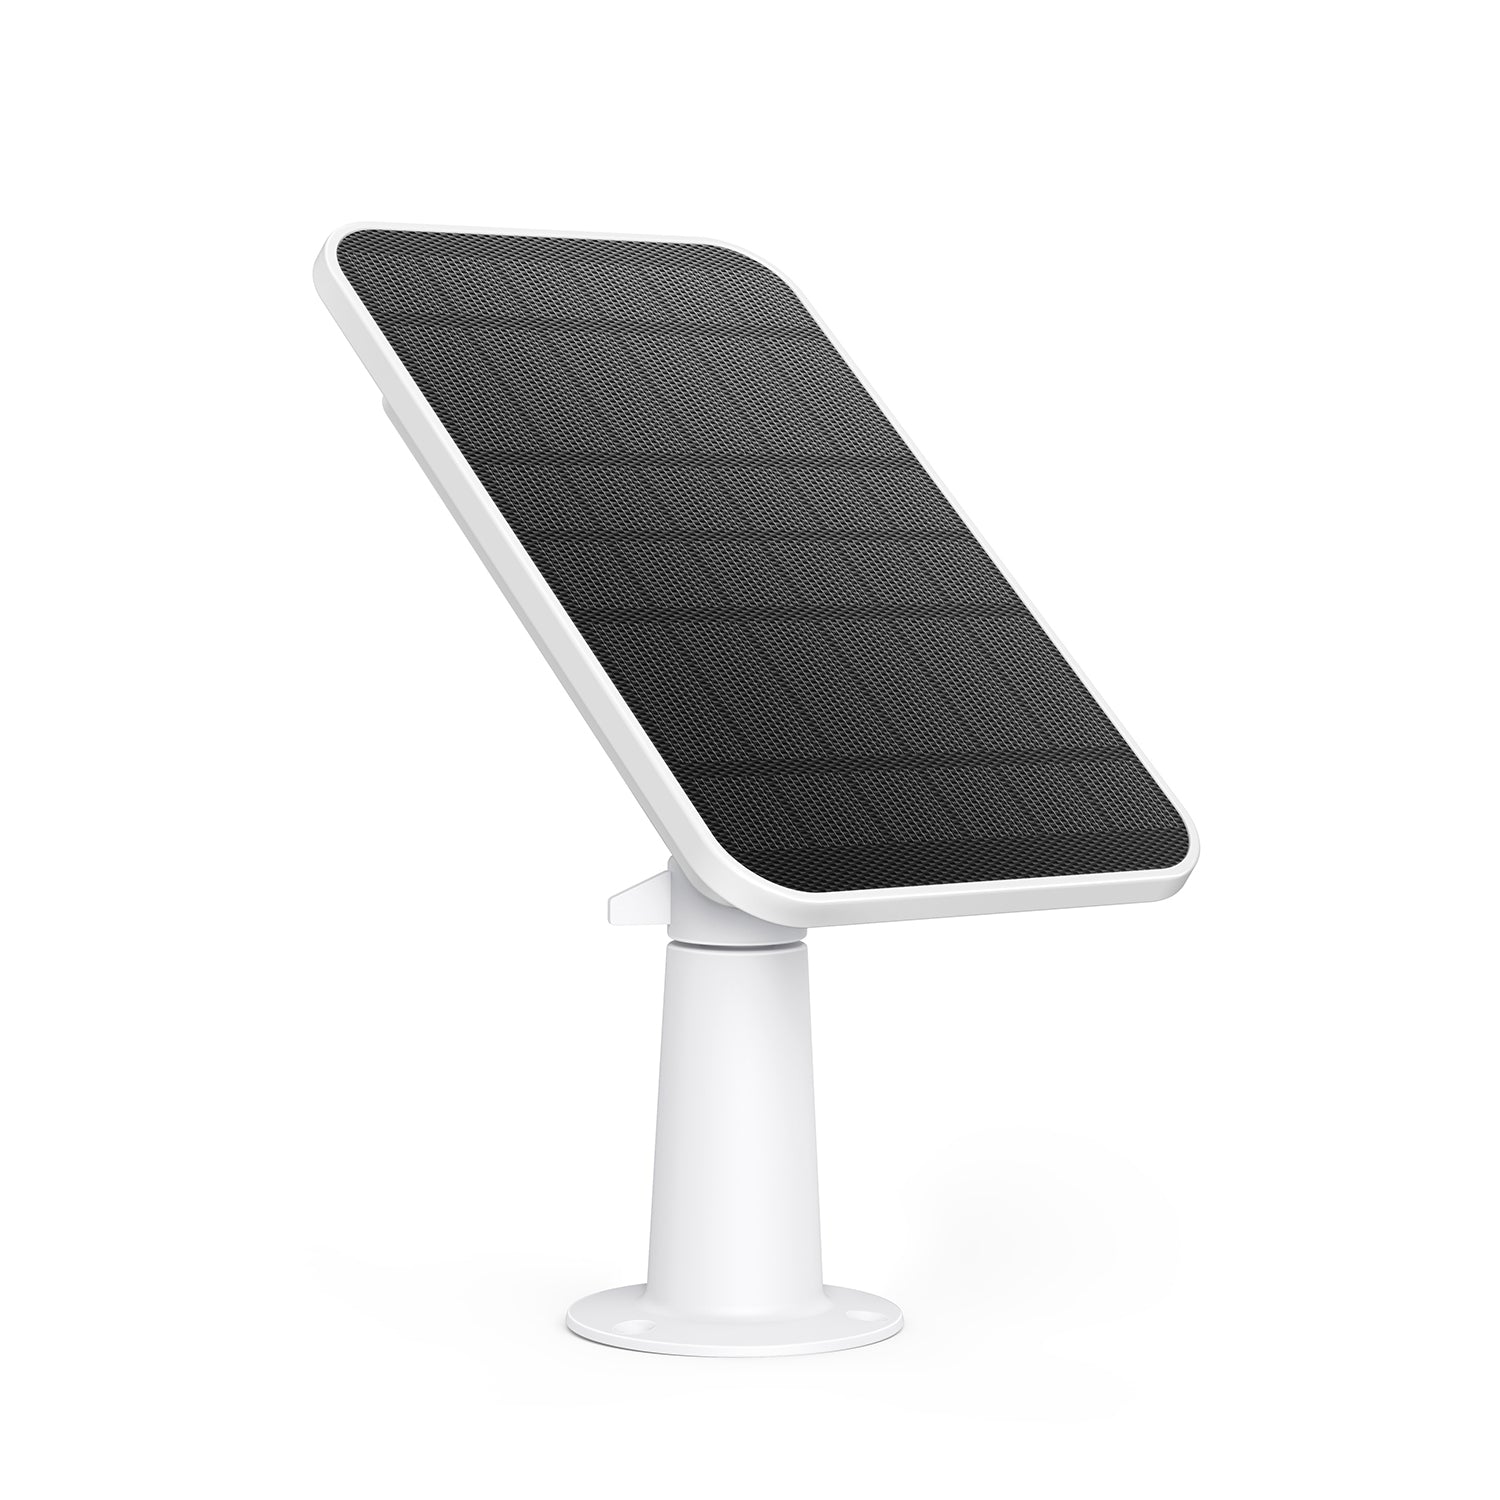 Solar Panel Charger(4 Pack)